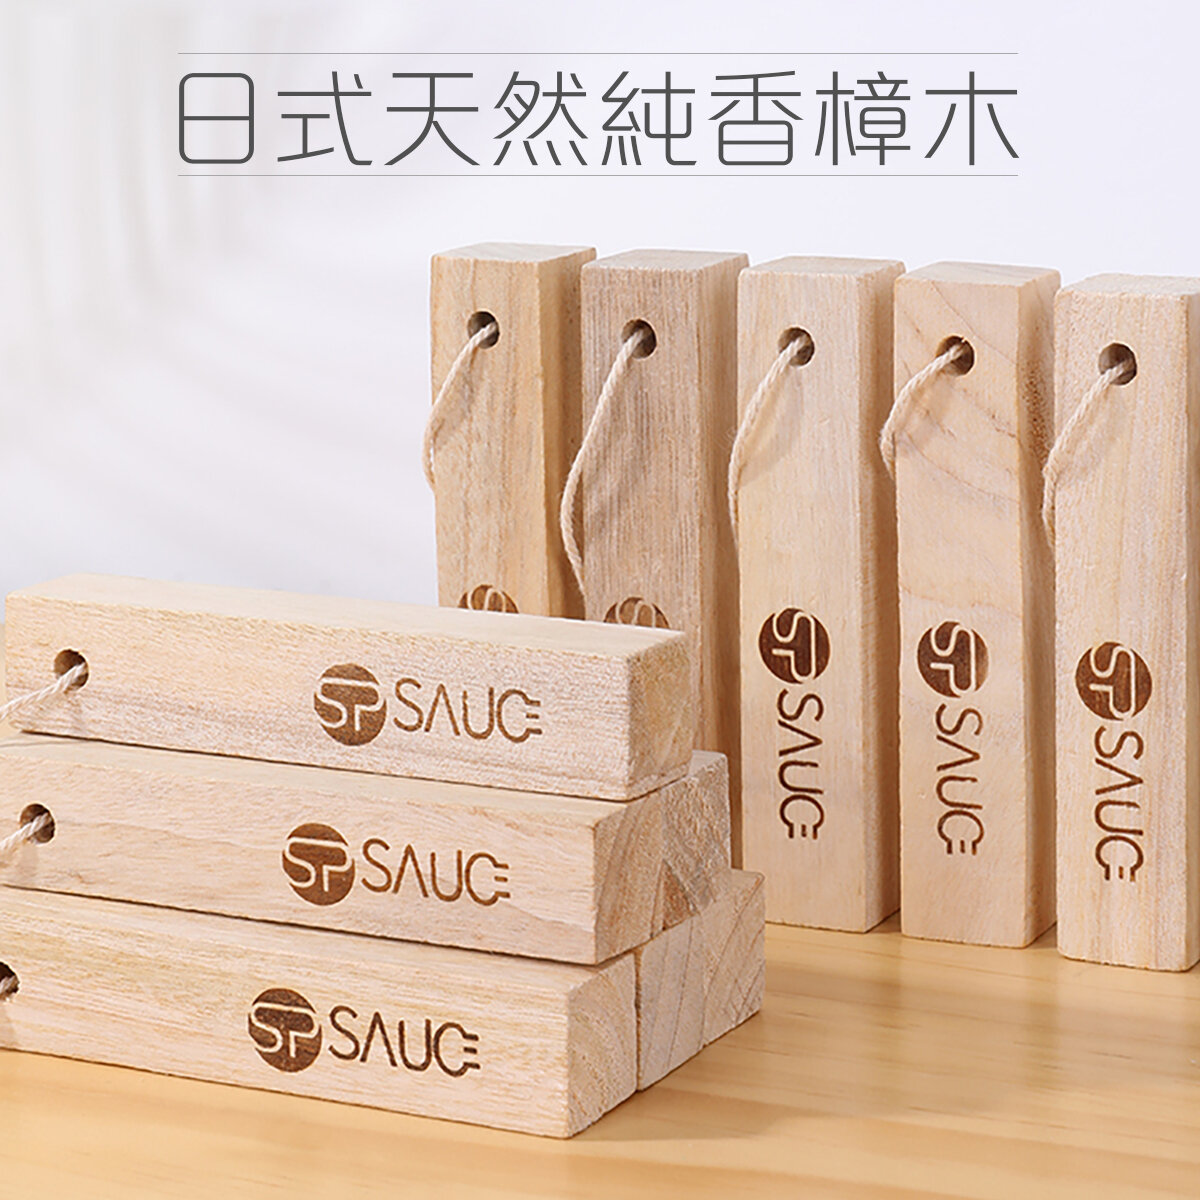 Japanese-style natural mildew; insect-proof; moisture-proof pure camphor wood (a box of 6)｜{E5c2} 439013